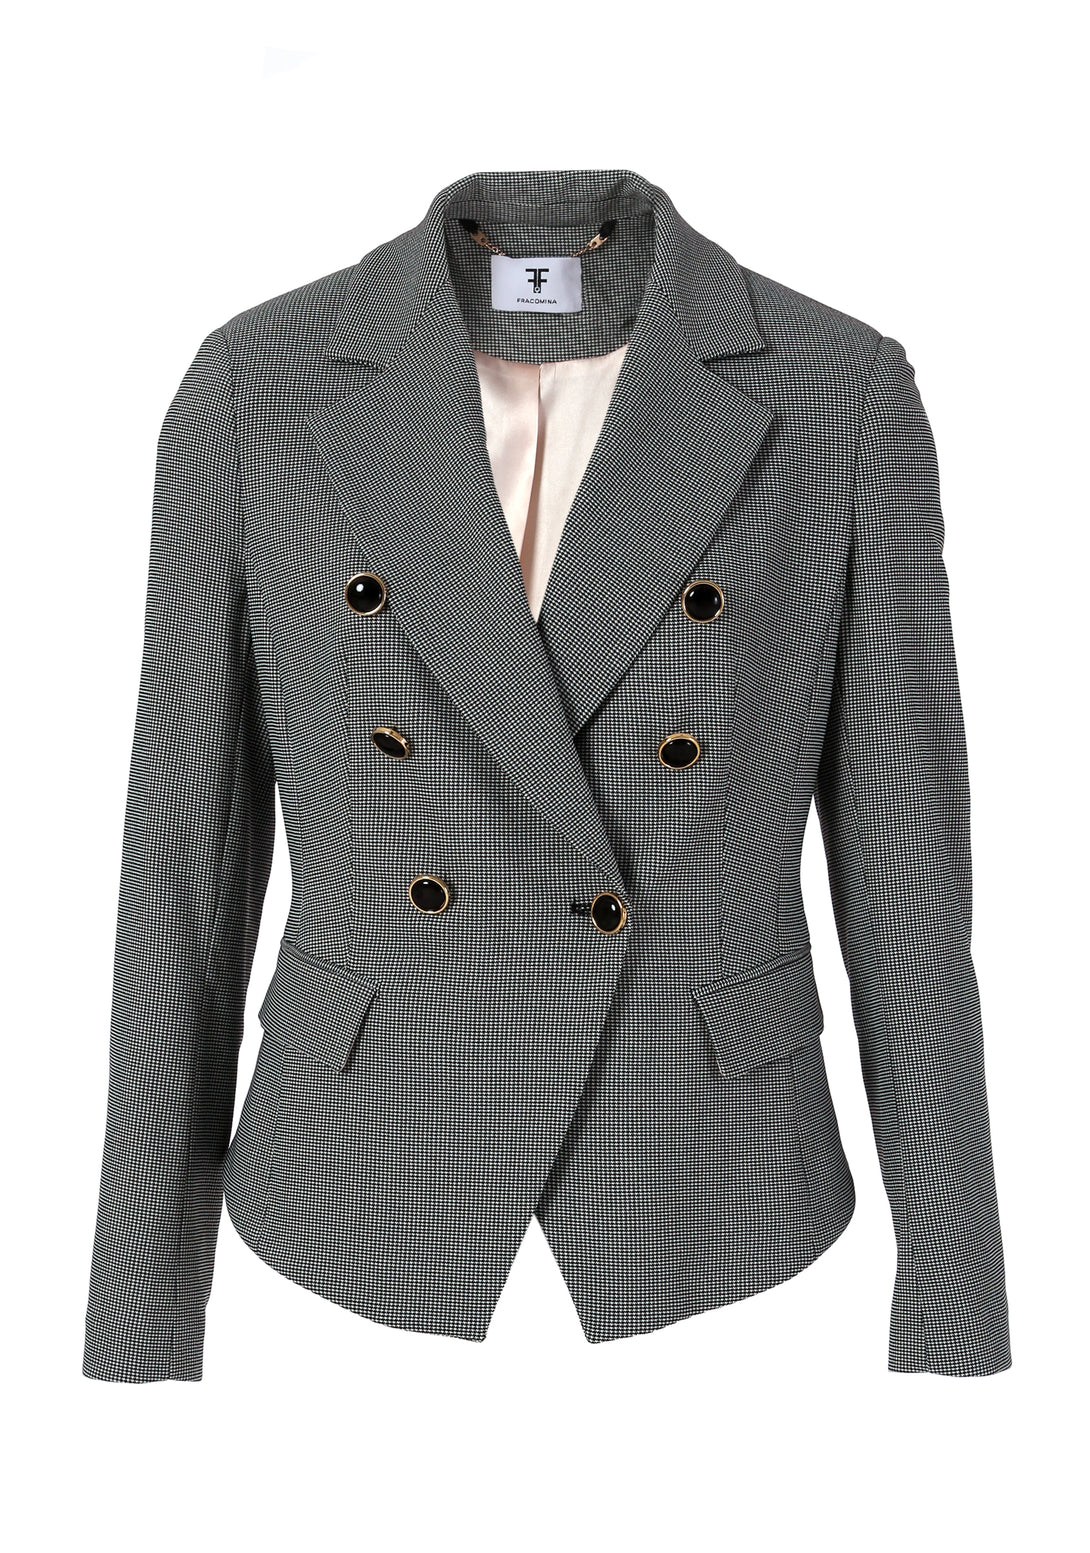 Blazer regular fit, double breasted, with pied de poule pattern